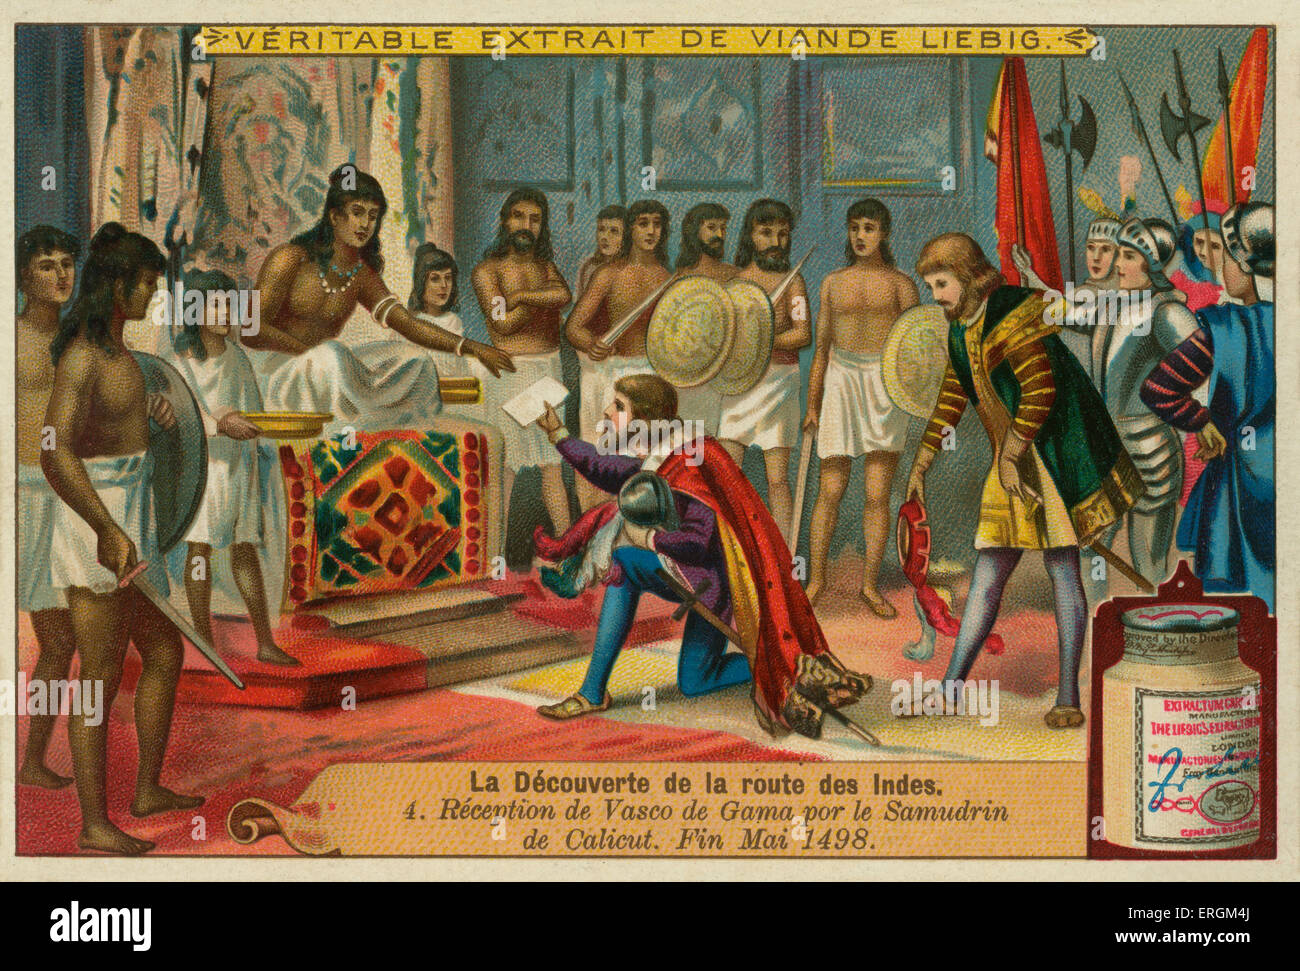 Vasco Da Gama welcomed by the Zamorin, ruler of the Calicut, at the end of May 1498. (French: Reception de Vasco de Gama par le Samudrin de Calicut. Fin Mai 1498). Liebig card, The discovery of the route to India, 1897. Stock Photo